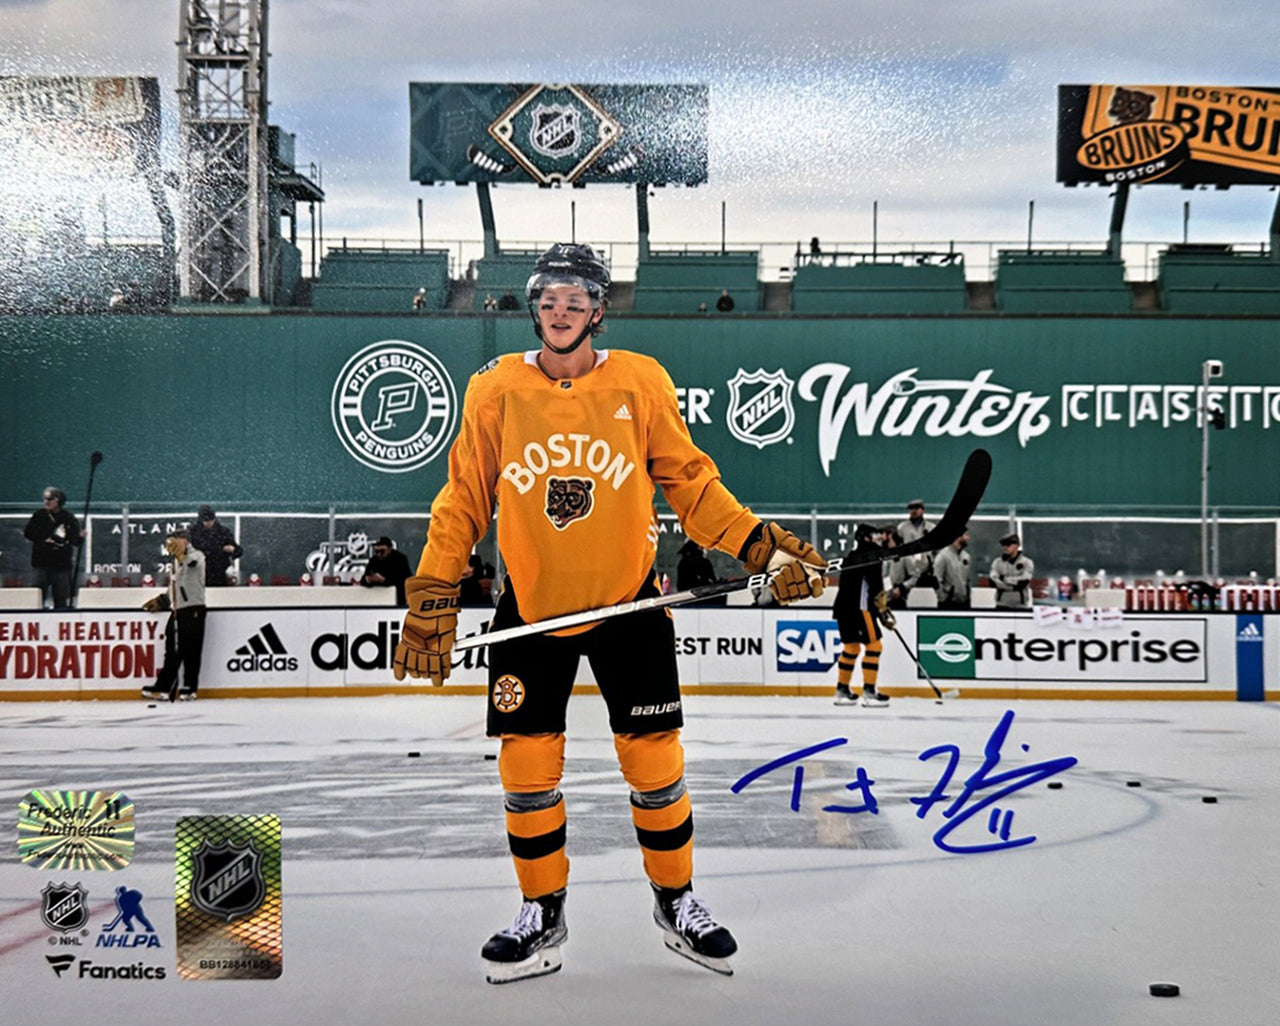 Trent Frederic Winter Classic Action Boston Bruins Autographed 8" x 10" Hockey Photo